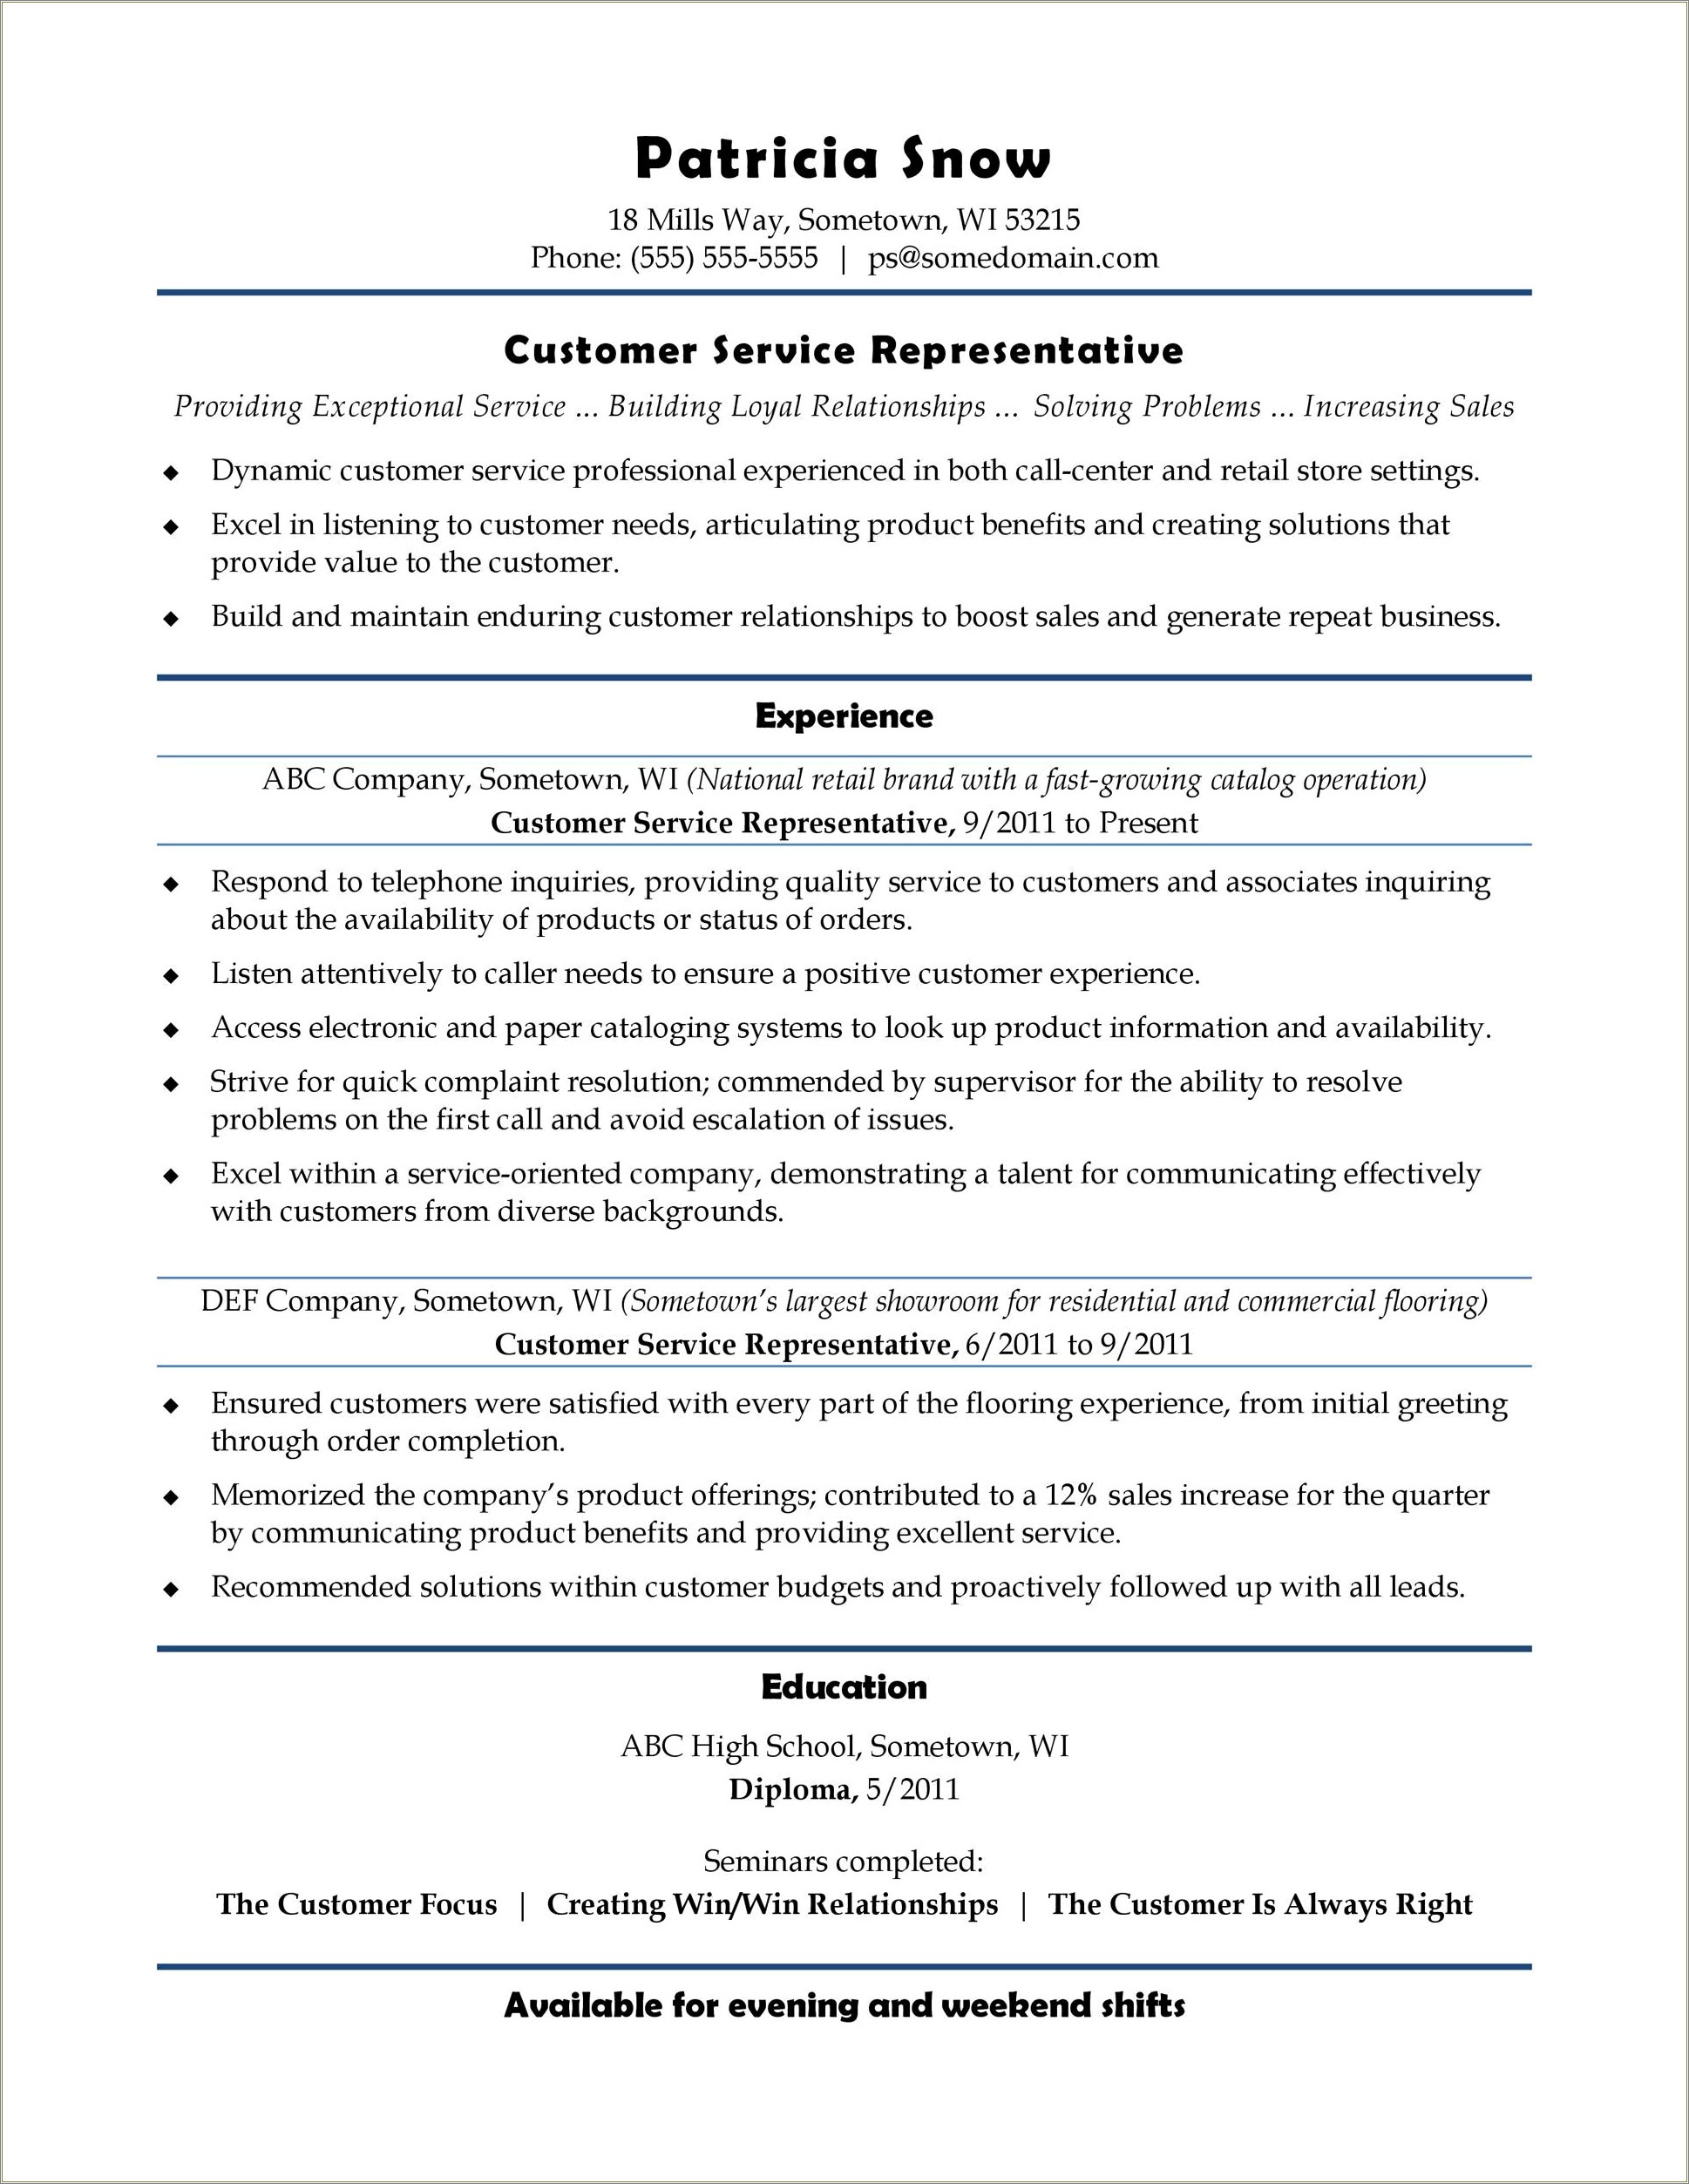 Examples Of Professional Customer Service Resumes